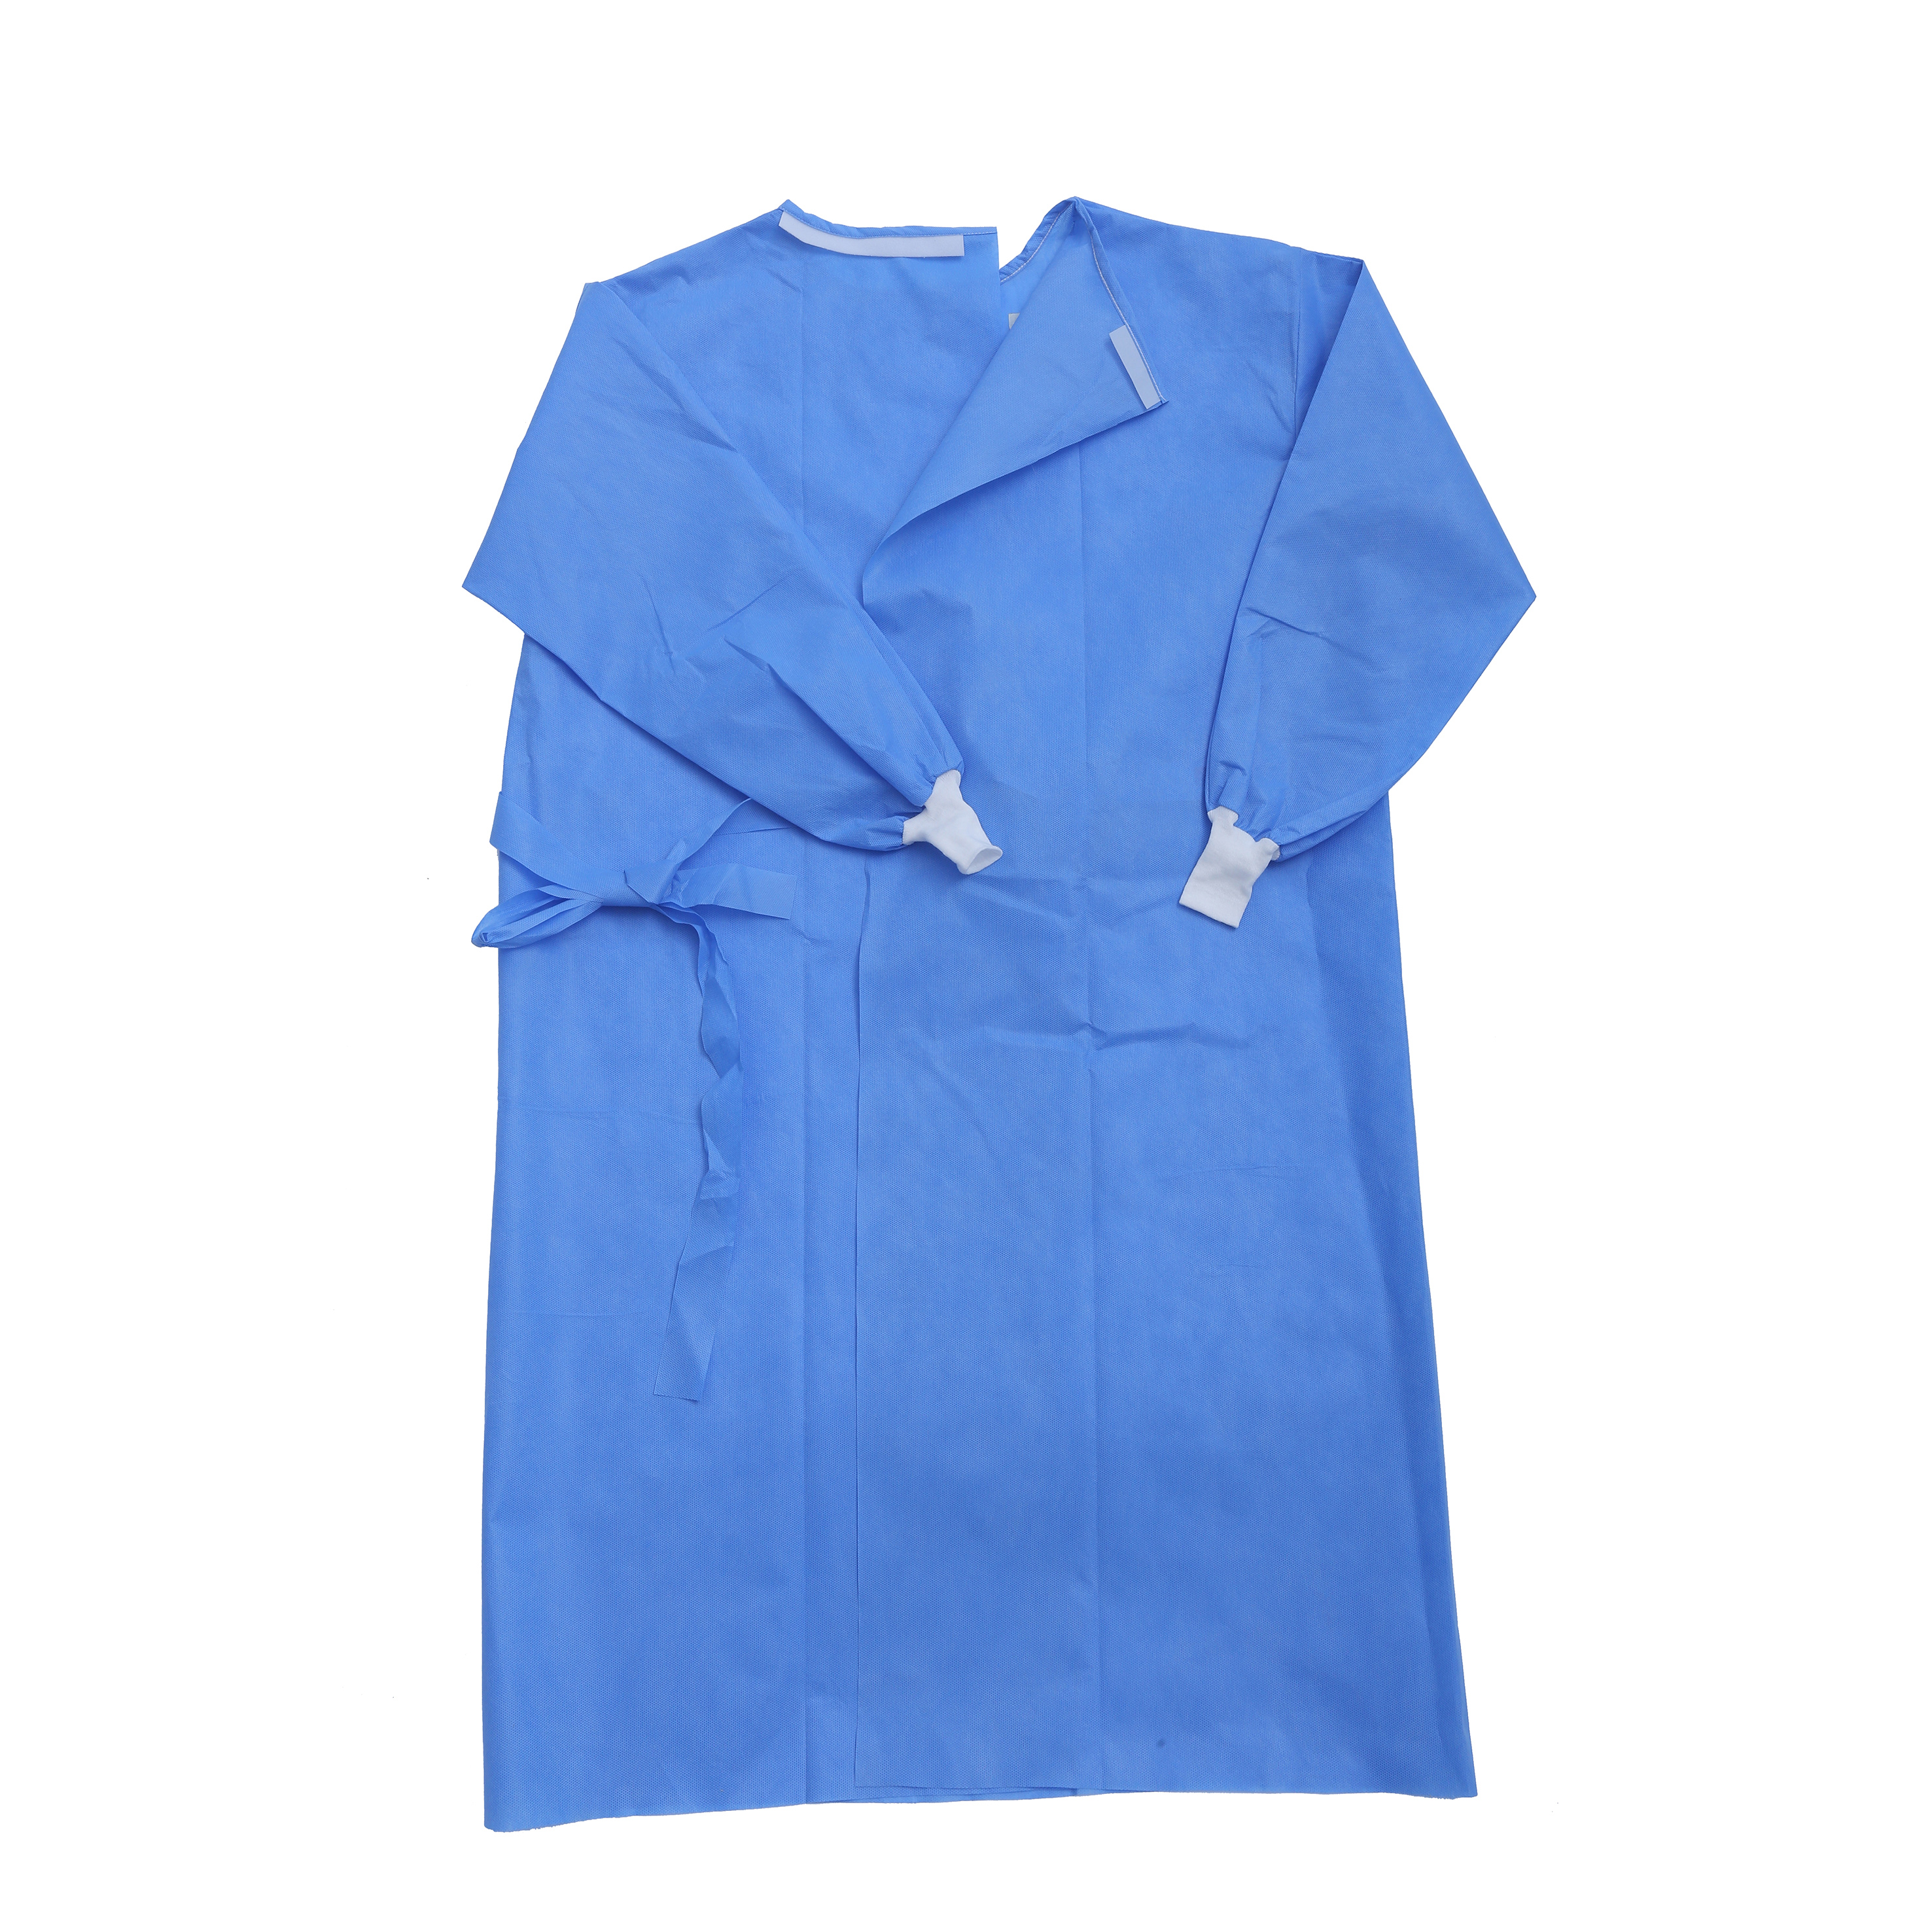 China Gold Supplier for Commodity Goods Market Yiwu - Hot Selling Disposable Isolation Gown Medical SMS Disposable Surgical Gown for Hospital – Sellers Union